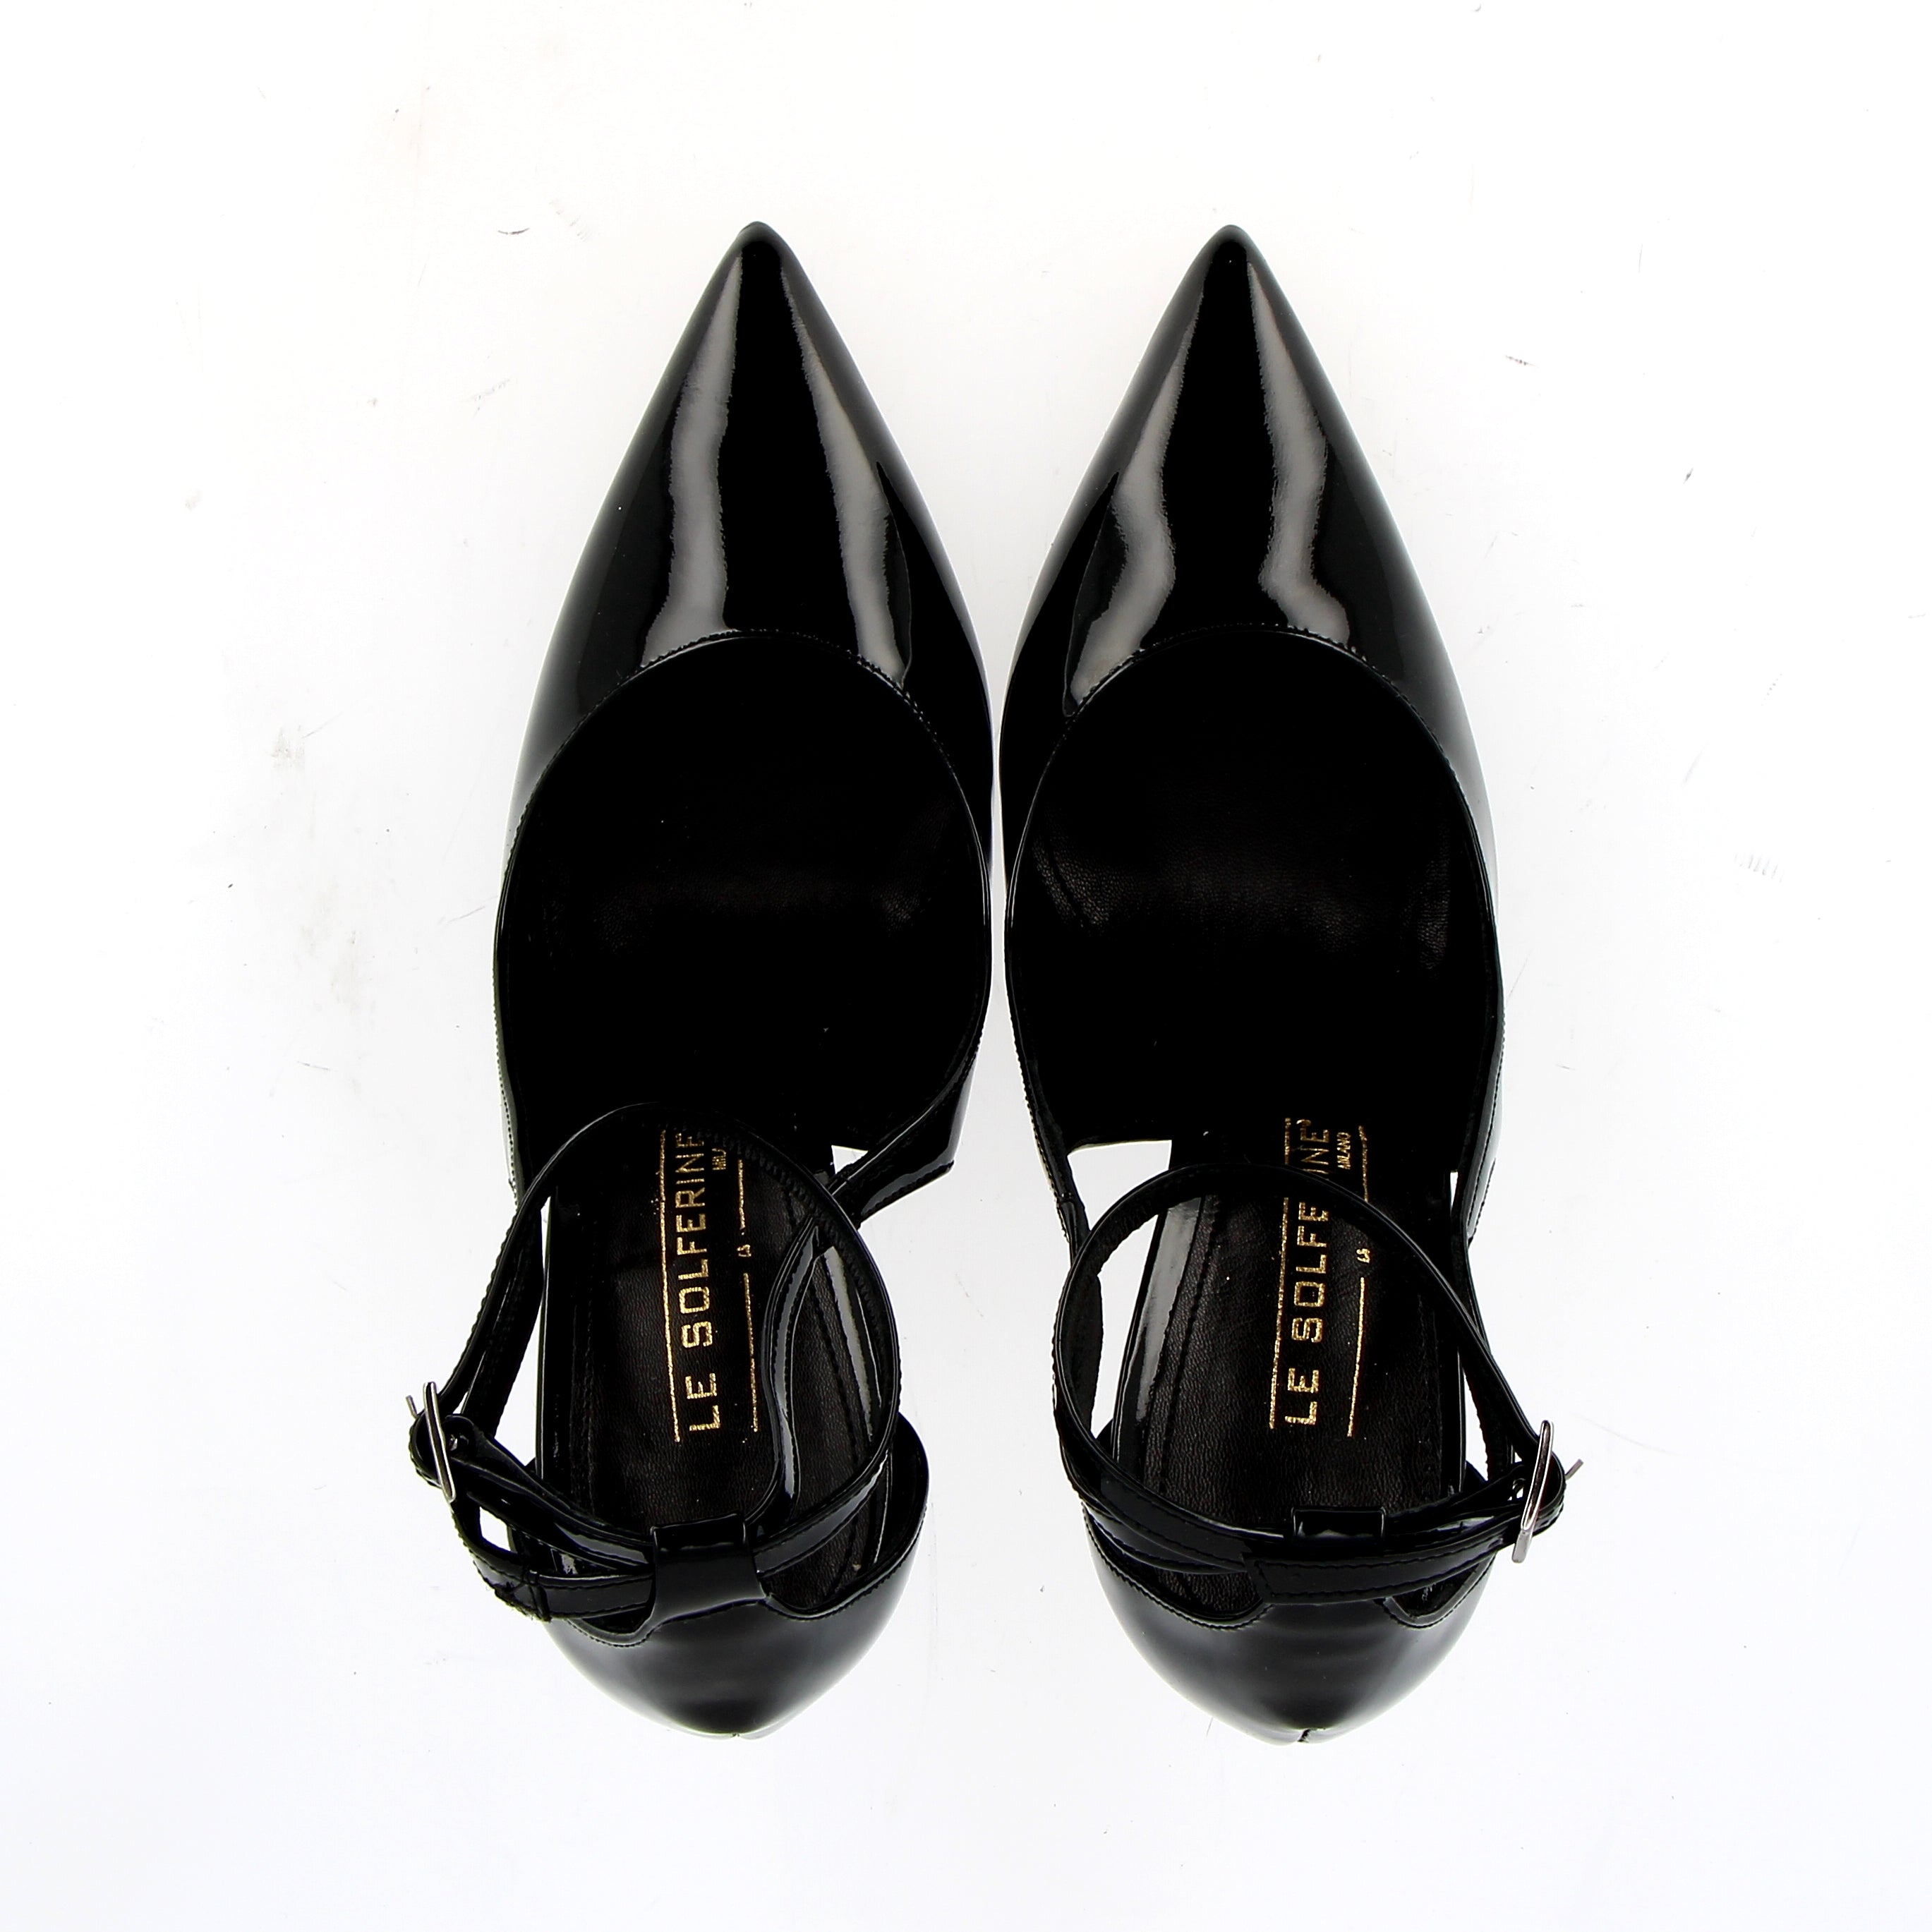 Shining black leather pump with straps